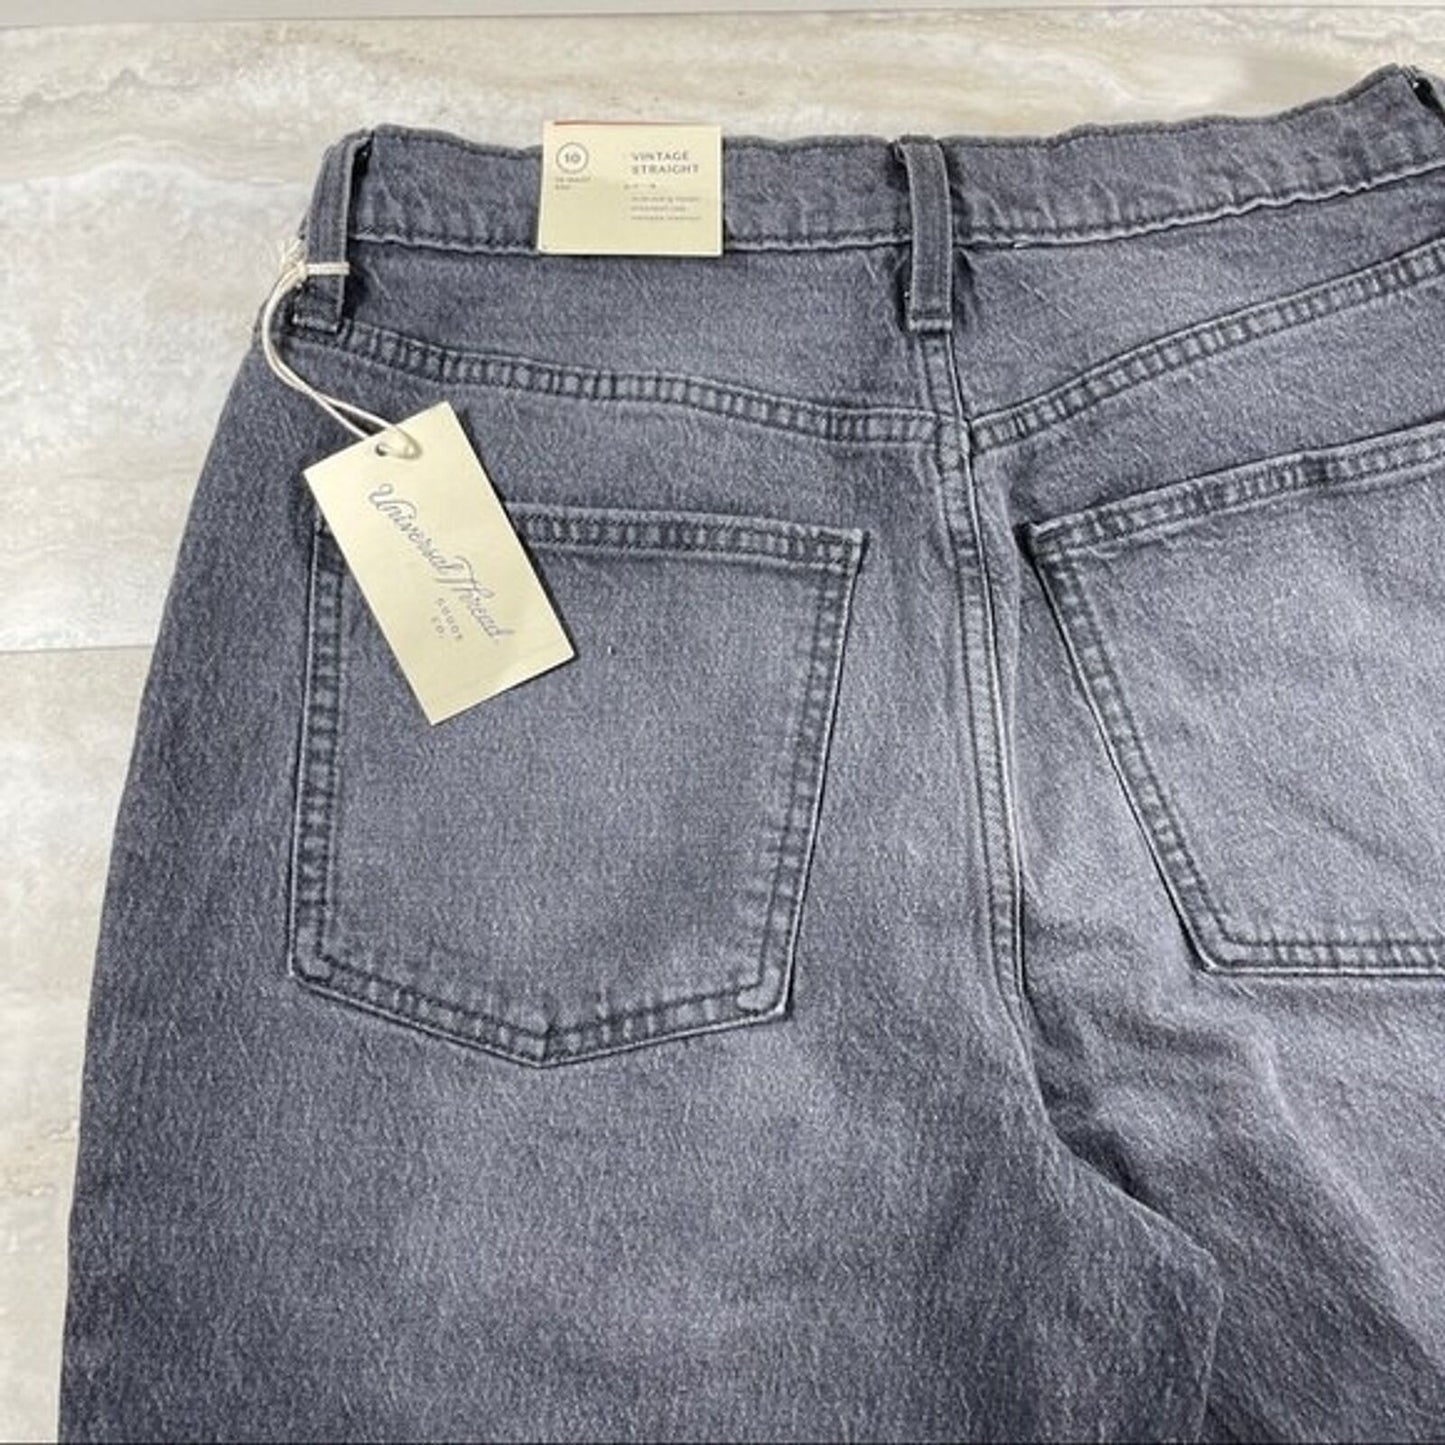 High Waist Size 10 Button Fly Jeans NWT Universal Thread Gray Stone Wash